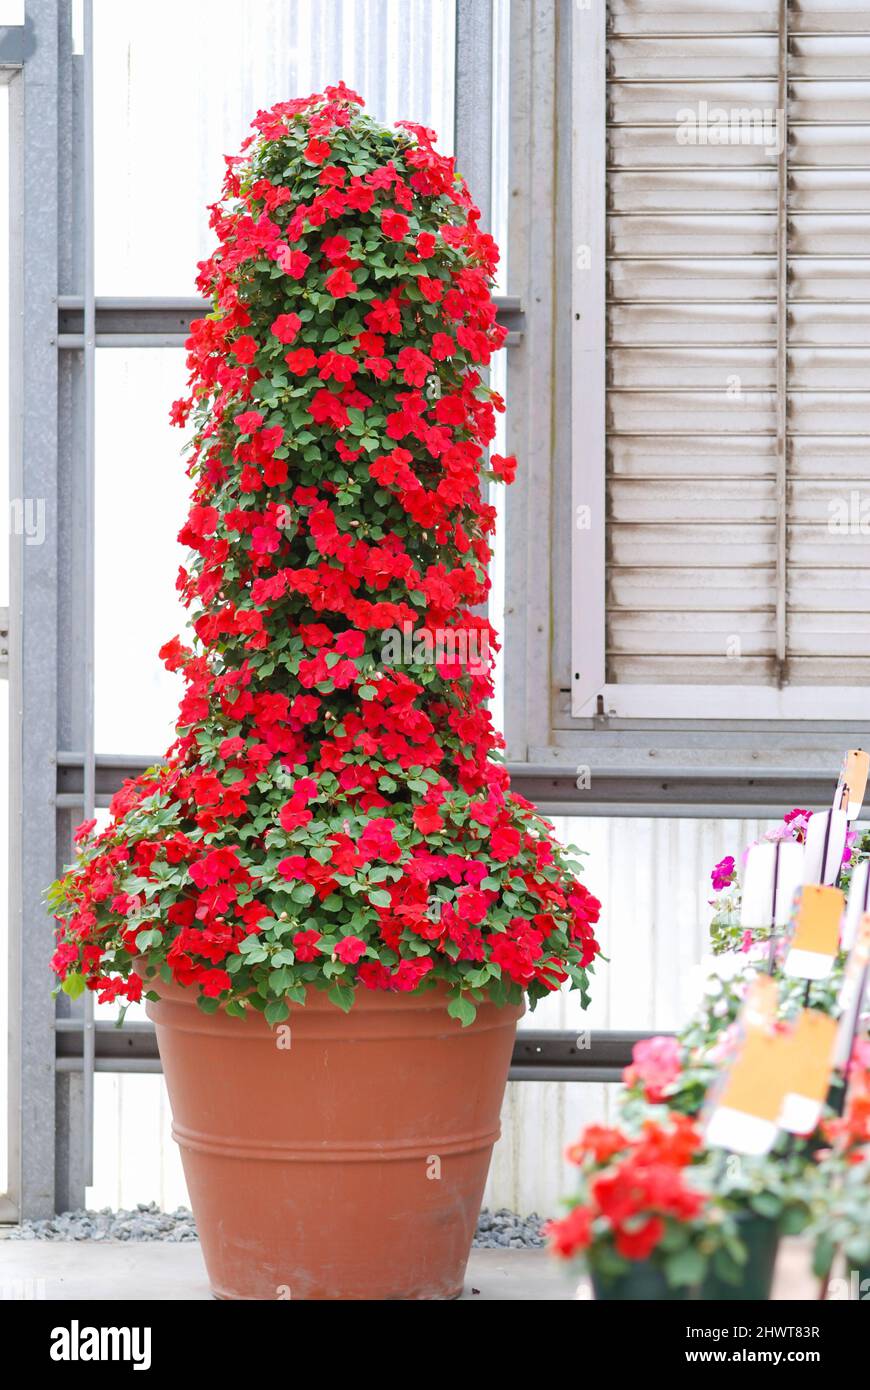 impatiens in potted, scientific name Impatiens walleriana flowers also called Balsam, flower bed of blossoms in red Stock Photo